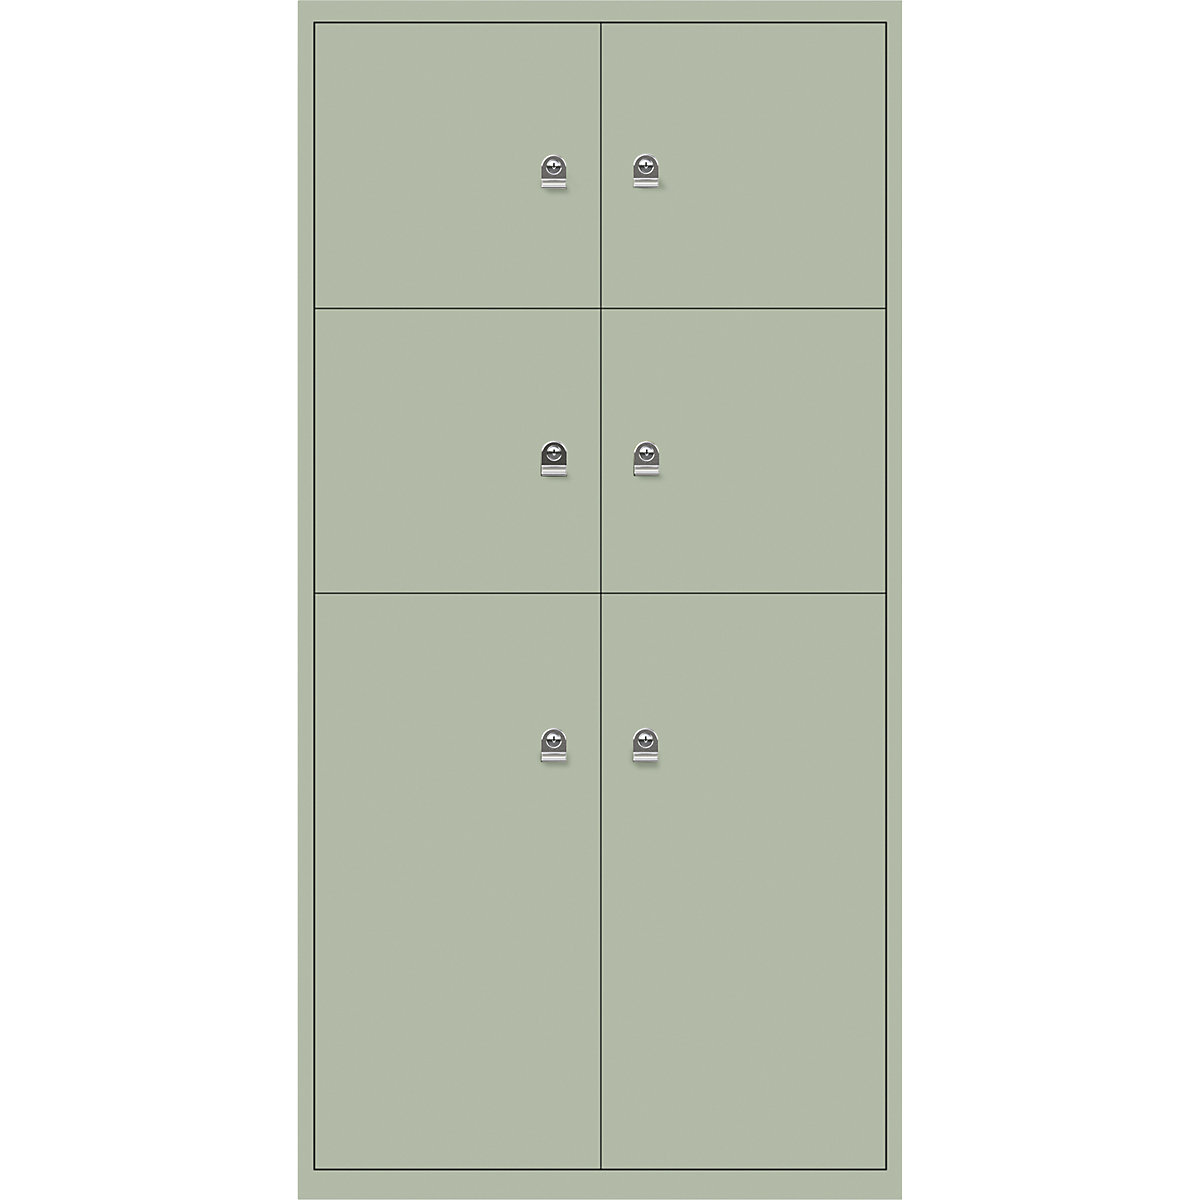 LateralFile™ lodge – BISLEY, with 6 lockable compartments, height 4 x 375 mm, 2 x 755 mm, regent-20